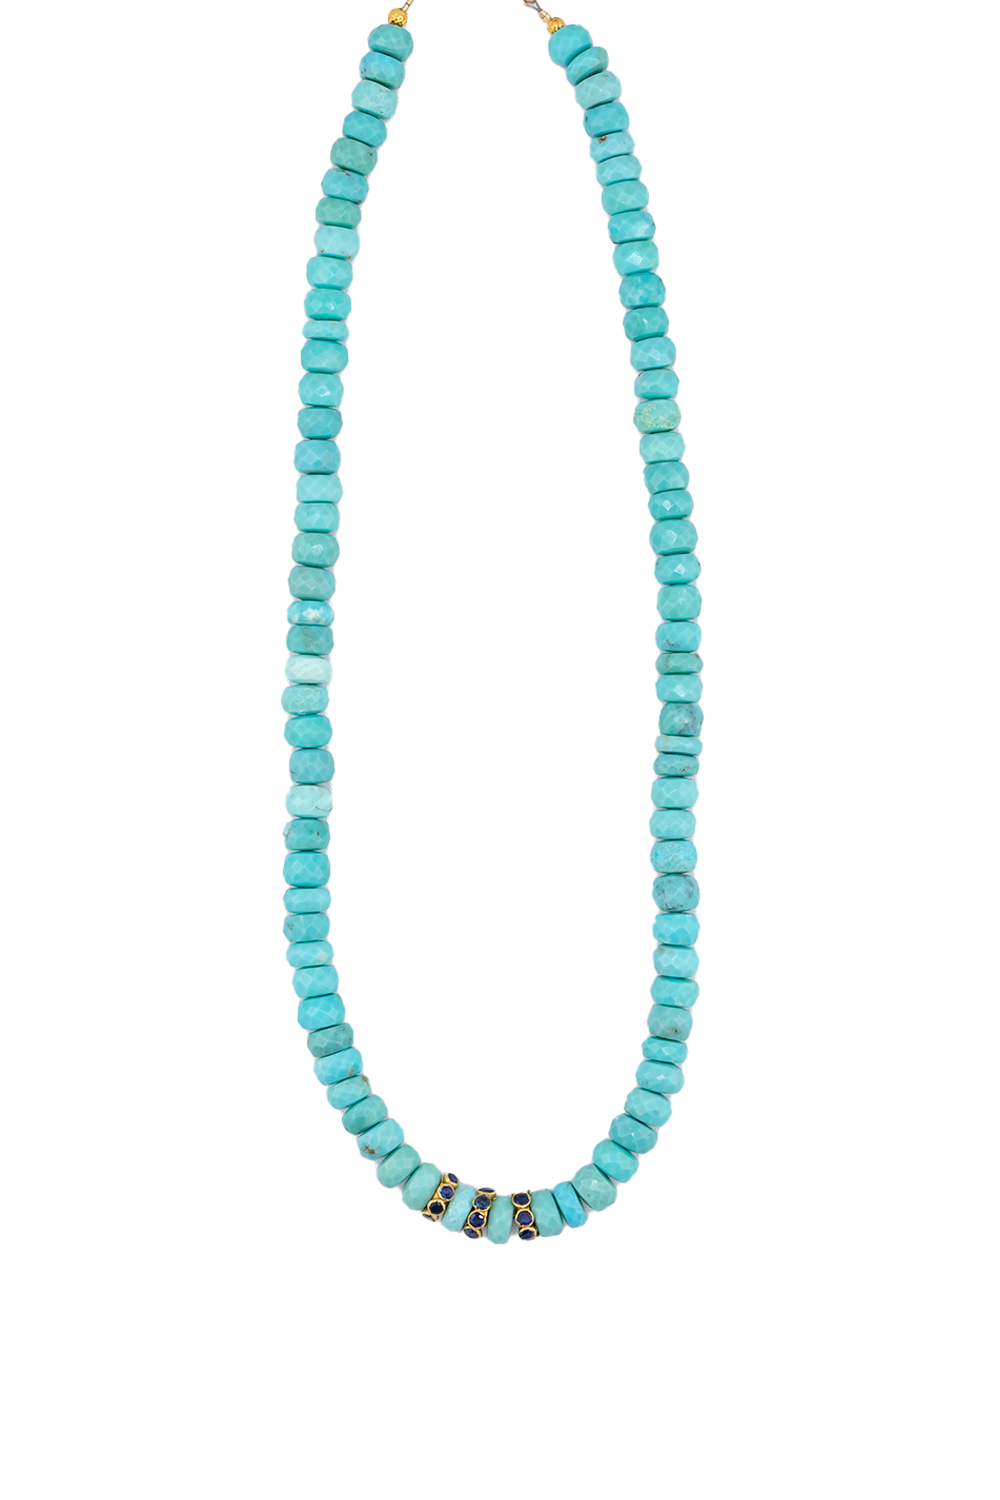 Faceted Sleeping Beauty Sapphire Bead Necklace